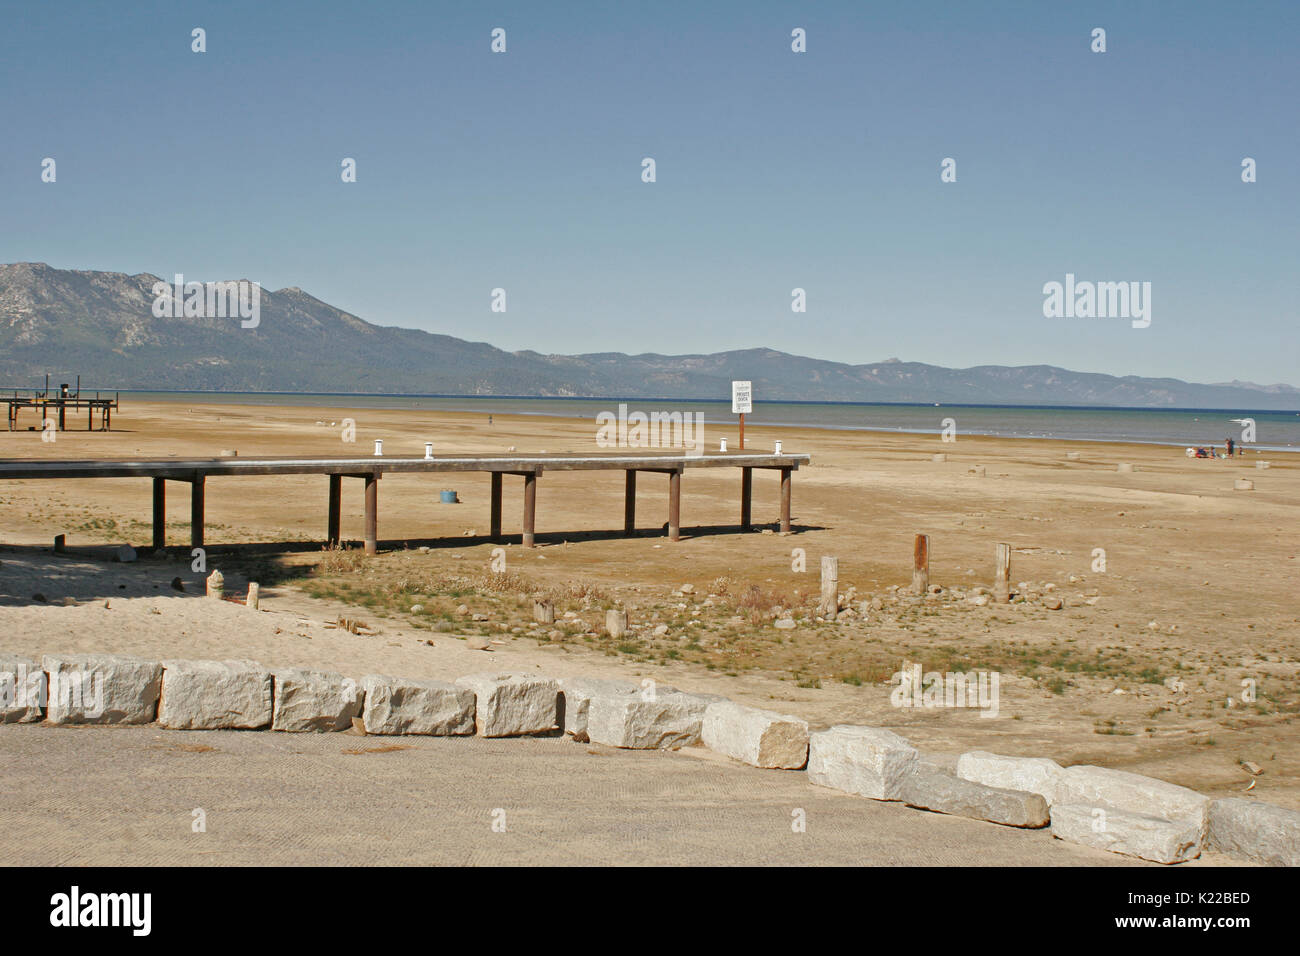 LAKE TAHOE PRIVATE DOCK AND BOAT RAMP ON DRY LAND DURING DROUGHT, CALIFORNIA Stock Photo